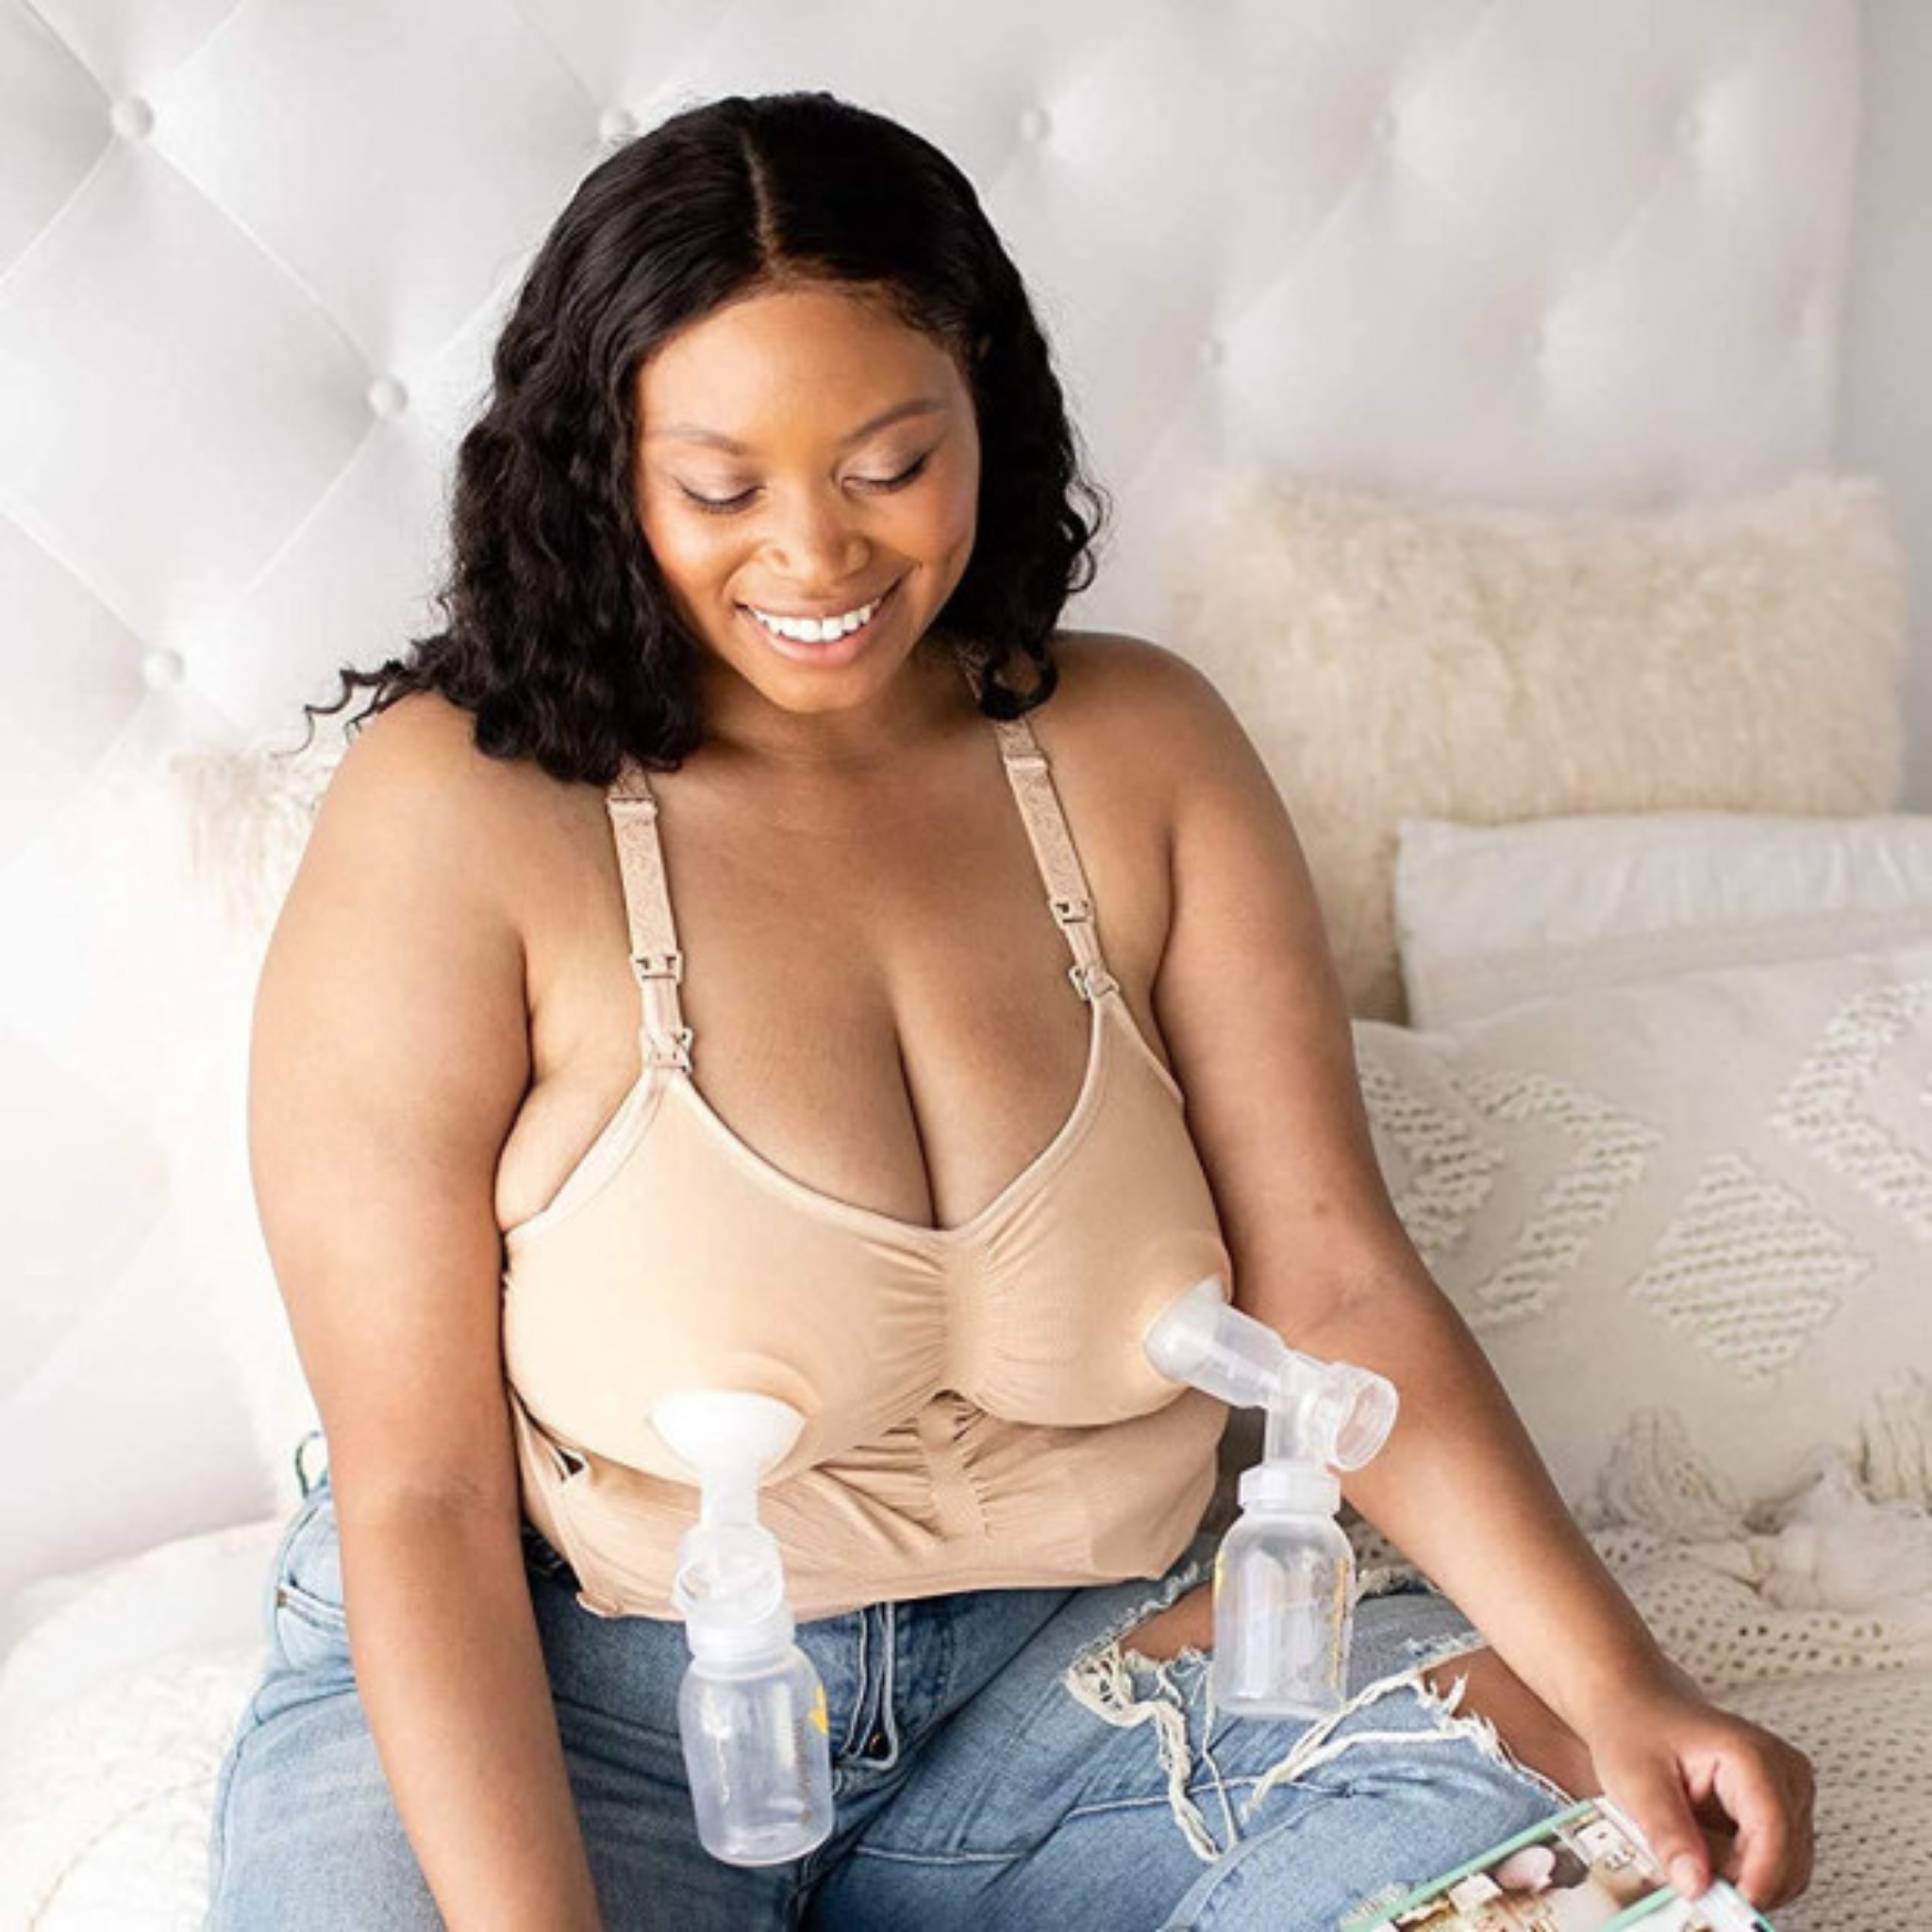 St. Vincent Women's Health Boutique - Simple Wishes Hands Free Pumping Bra